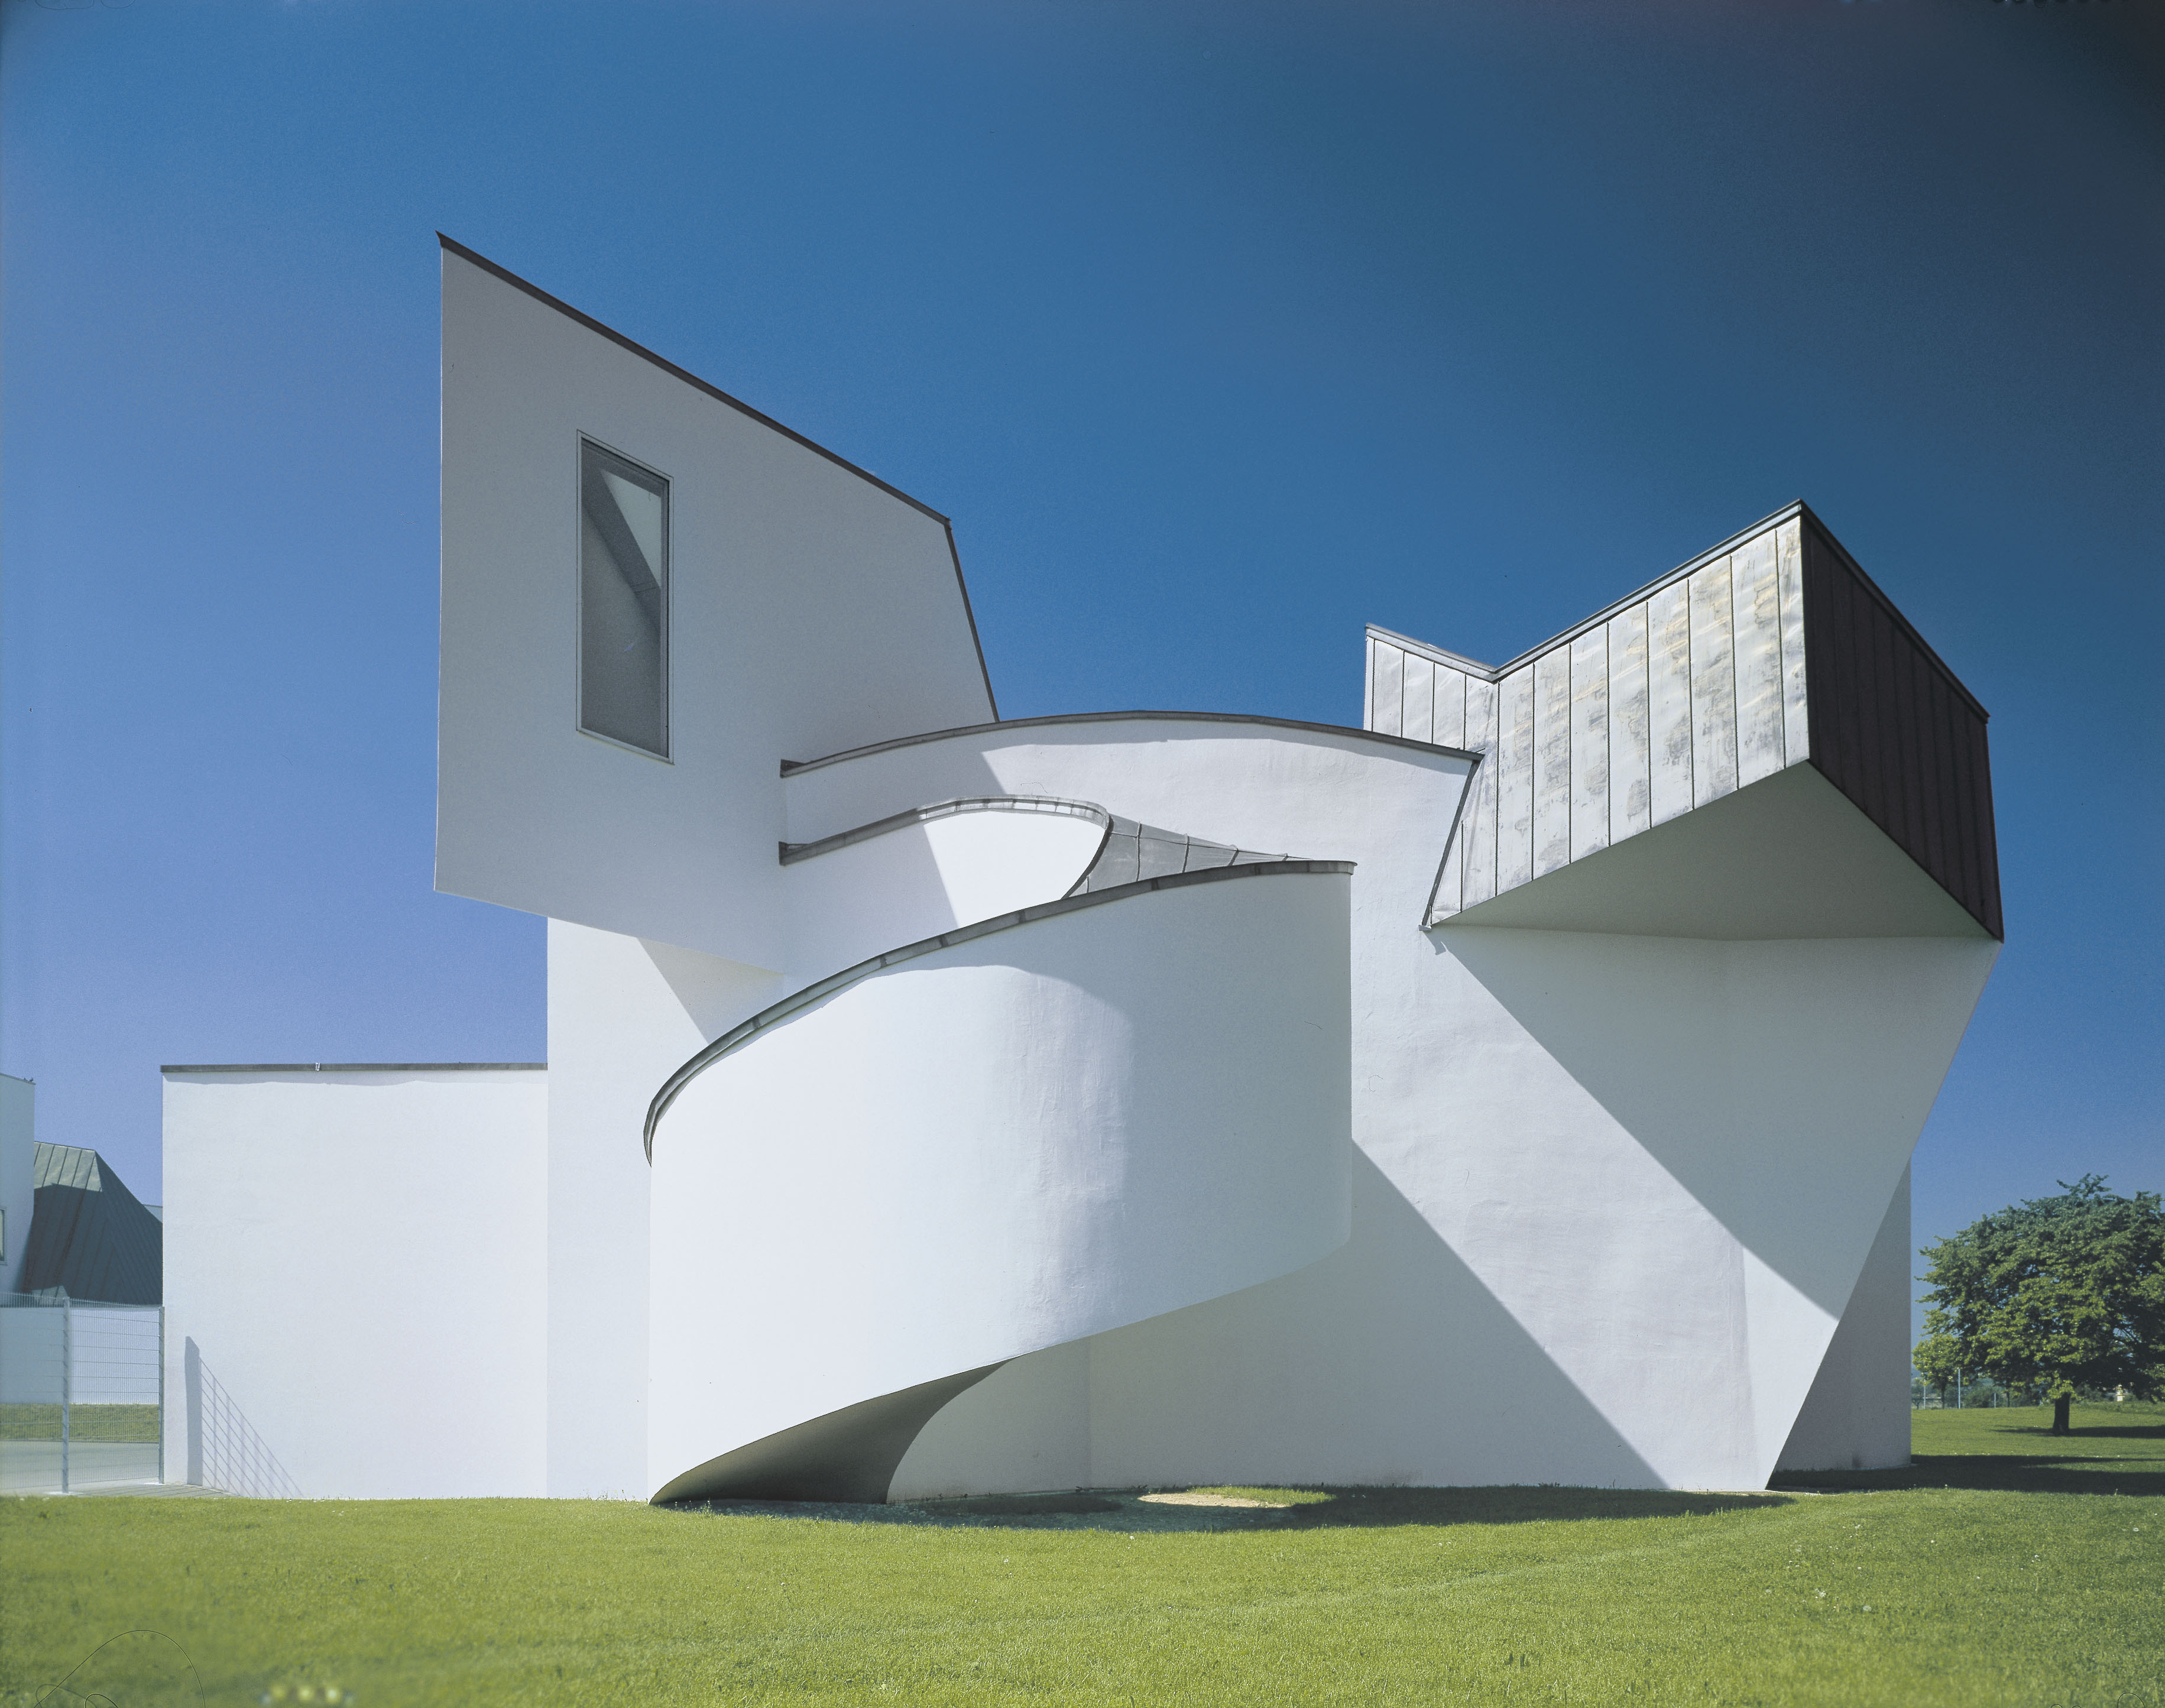 05 Vitra%20Design%20Museum %20Frank%20Gehry %201989 